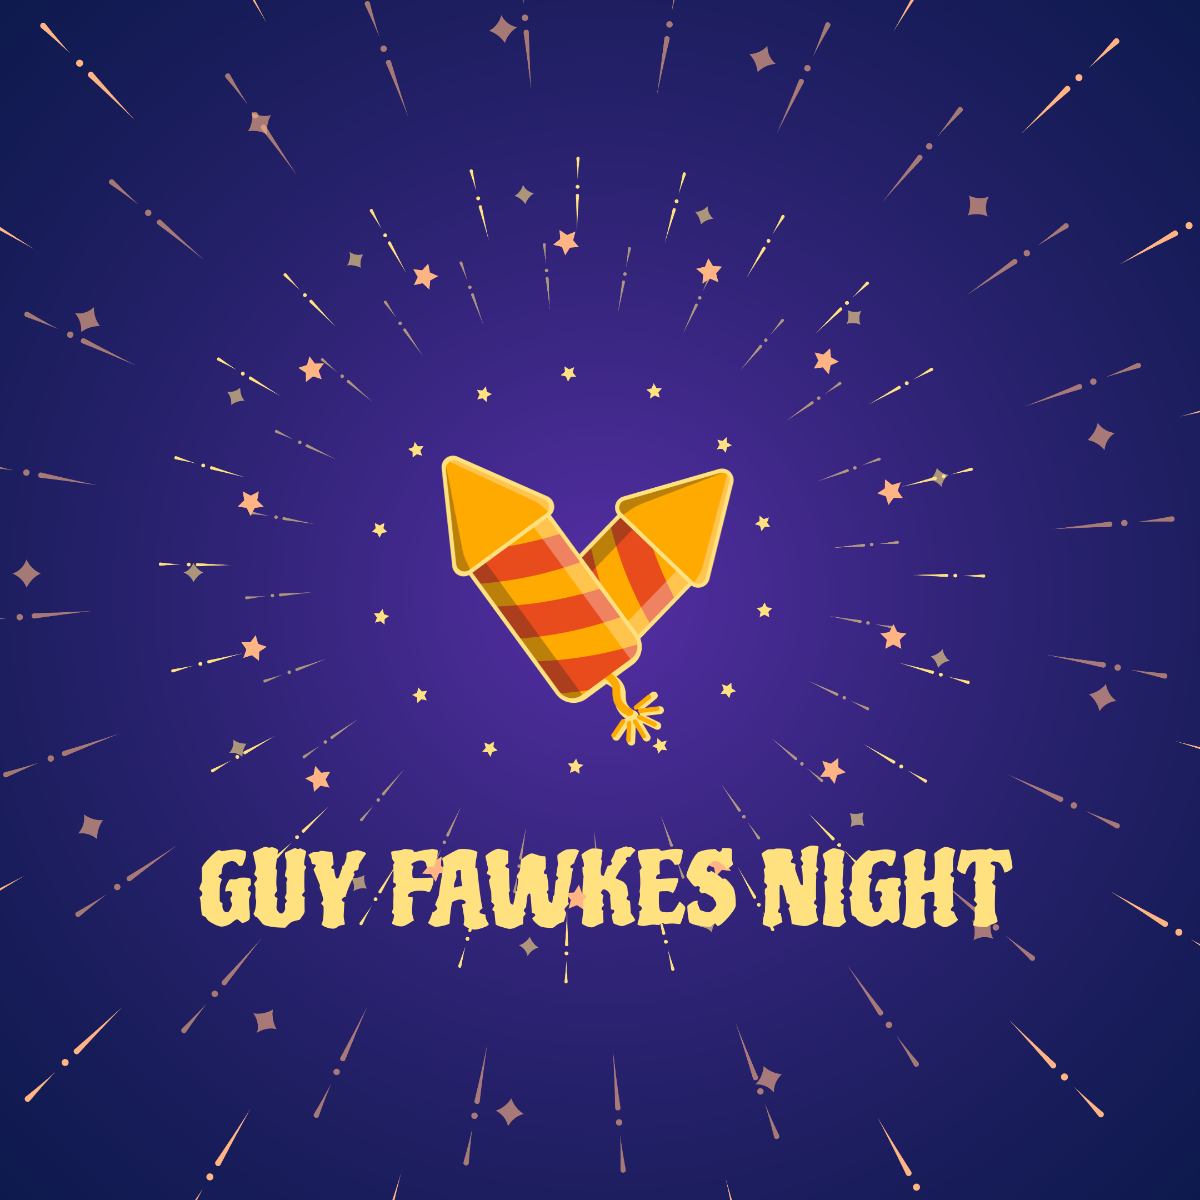 Guy Fawkes Night Instagram Post Template